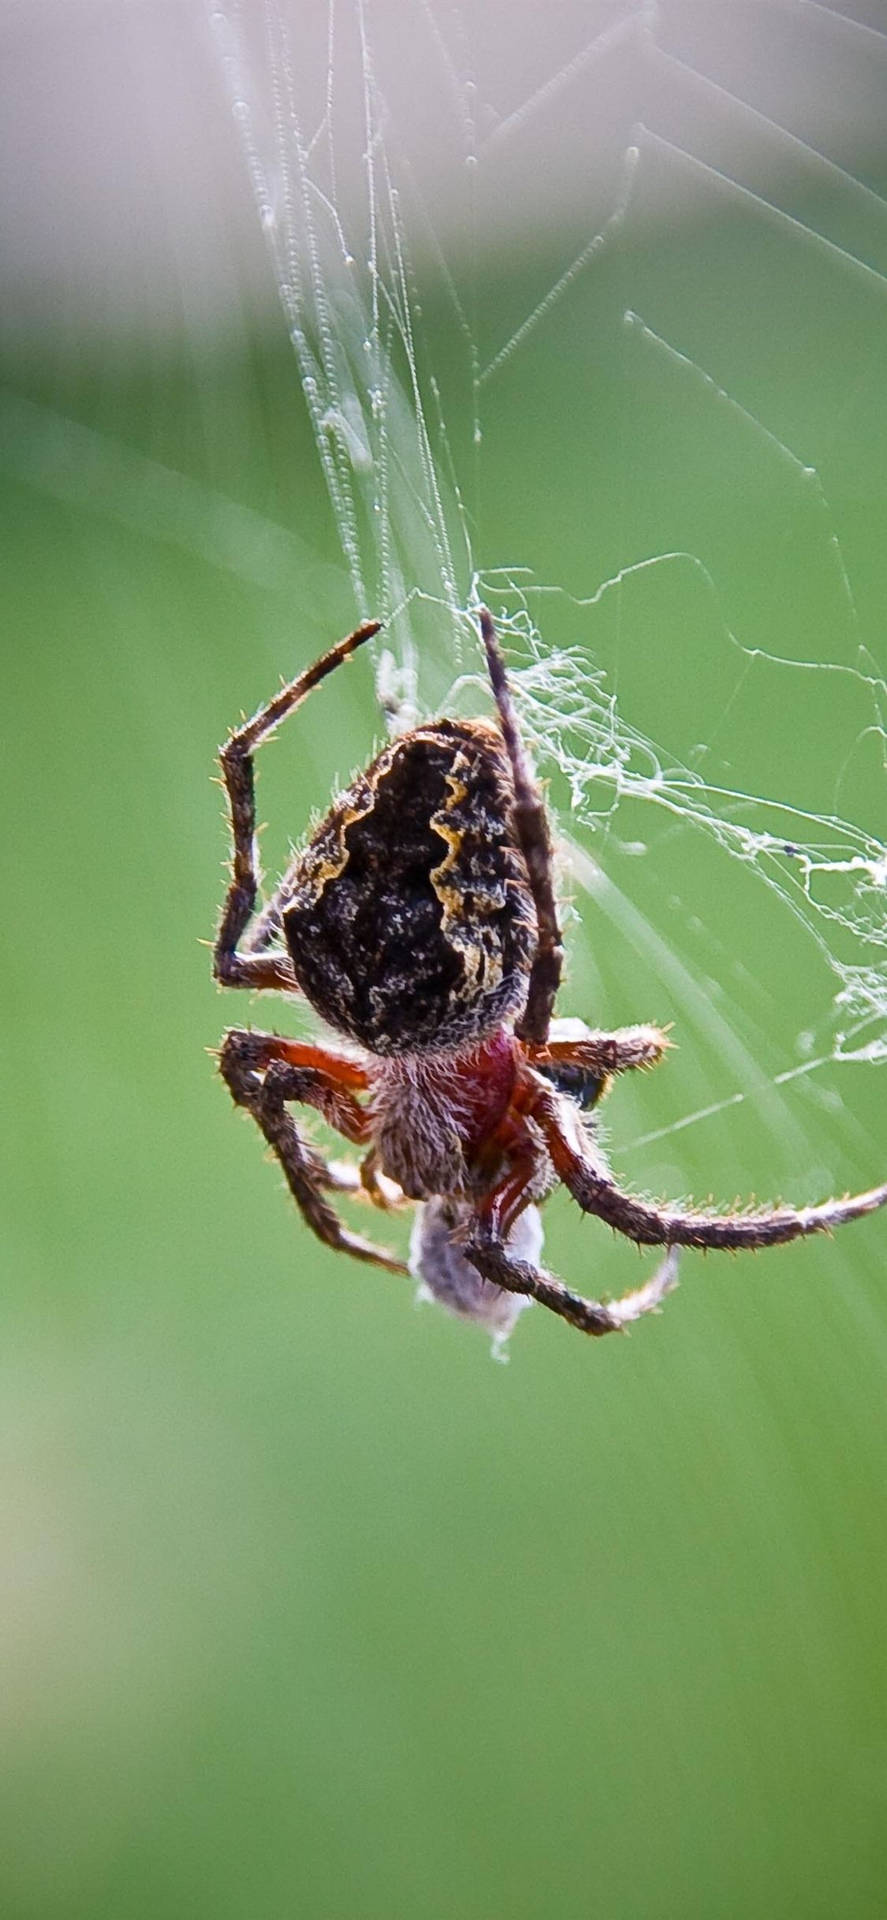 Spider With Prey